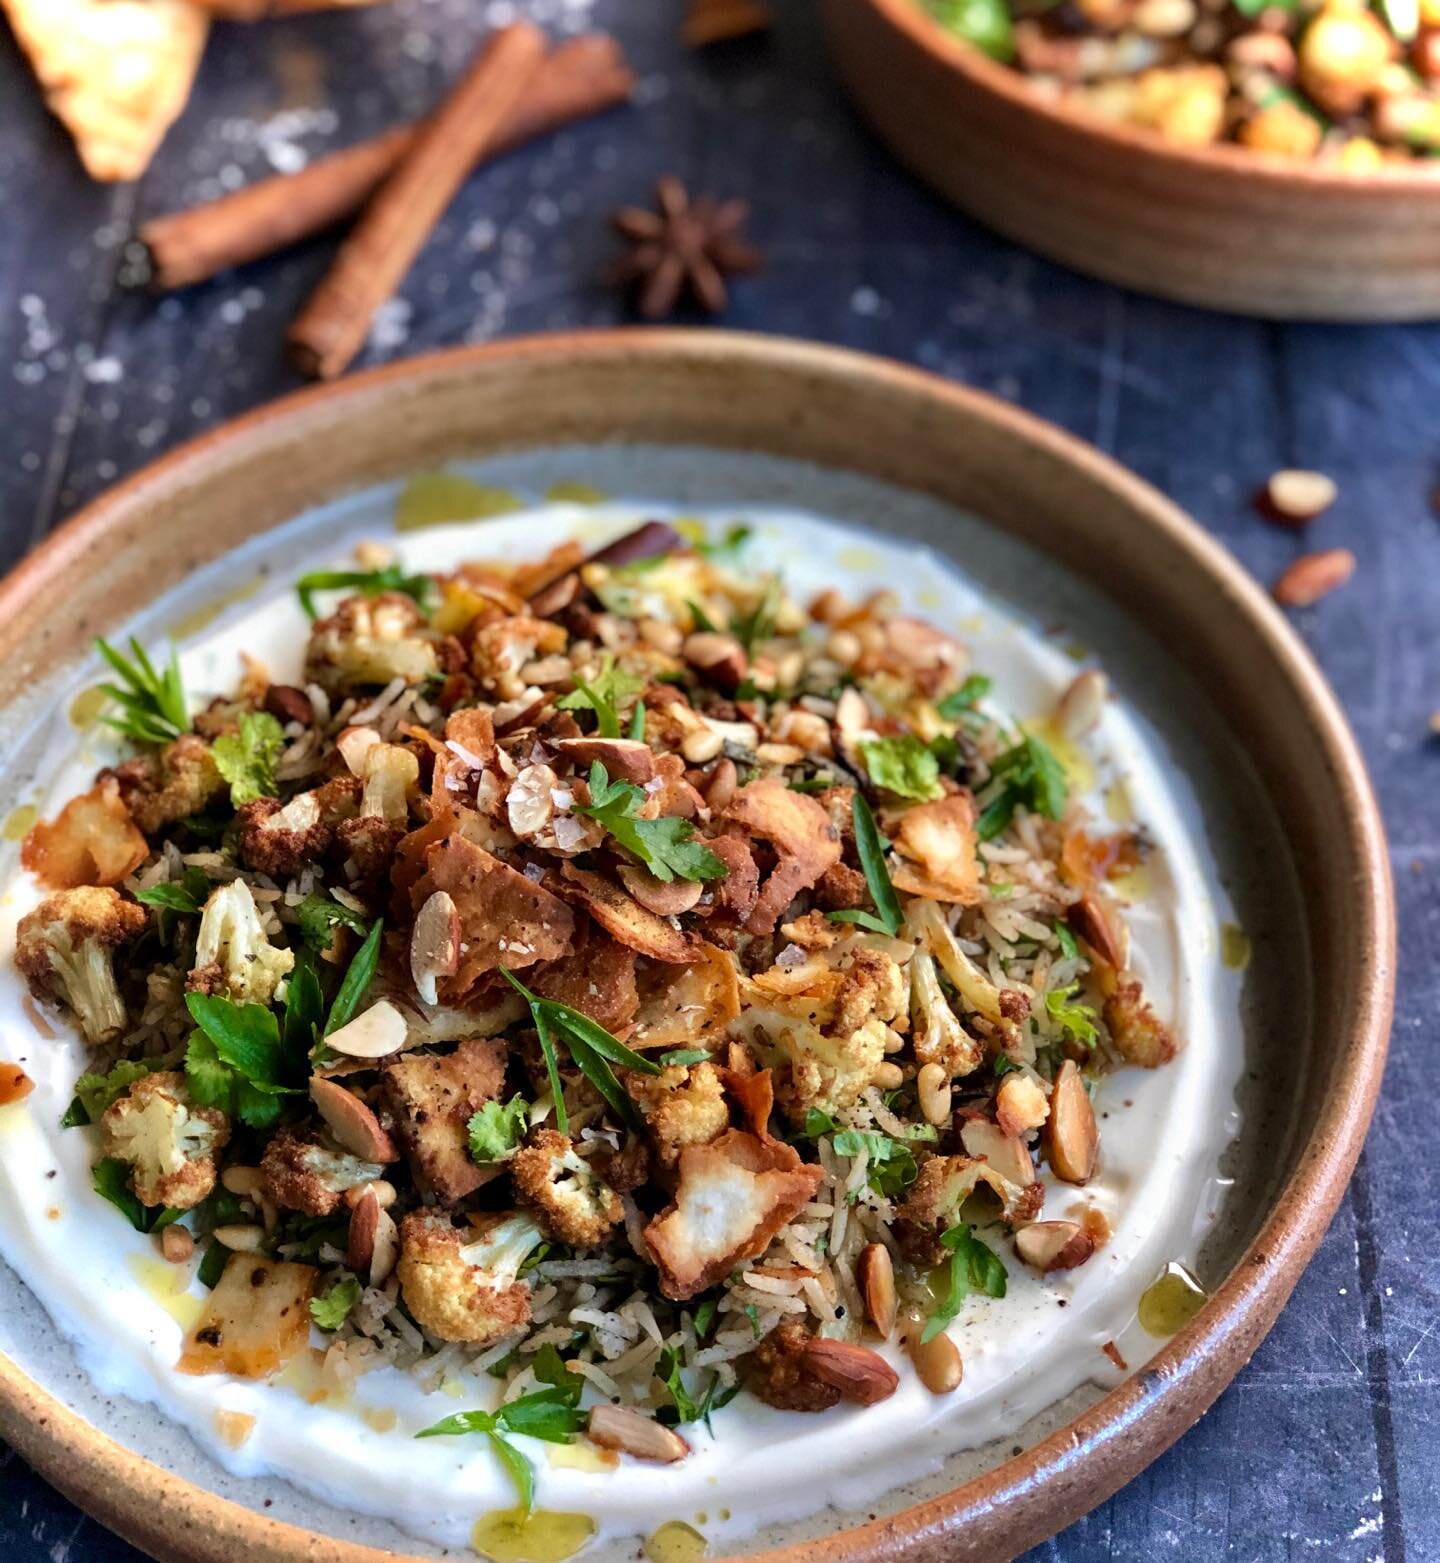 Loaded Middle Eastern spiced rice. Part biryani, part pilaf, part fatteh and 100% yum!
Plates by the talented Sandra Bowkett.
Click on the link in my bio for this recipe.